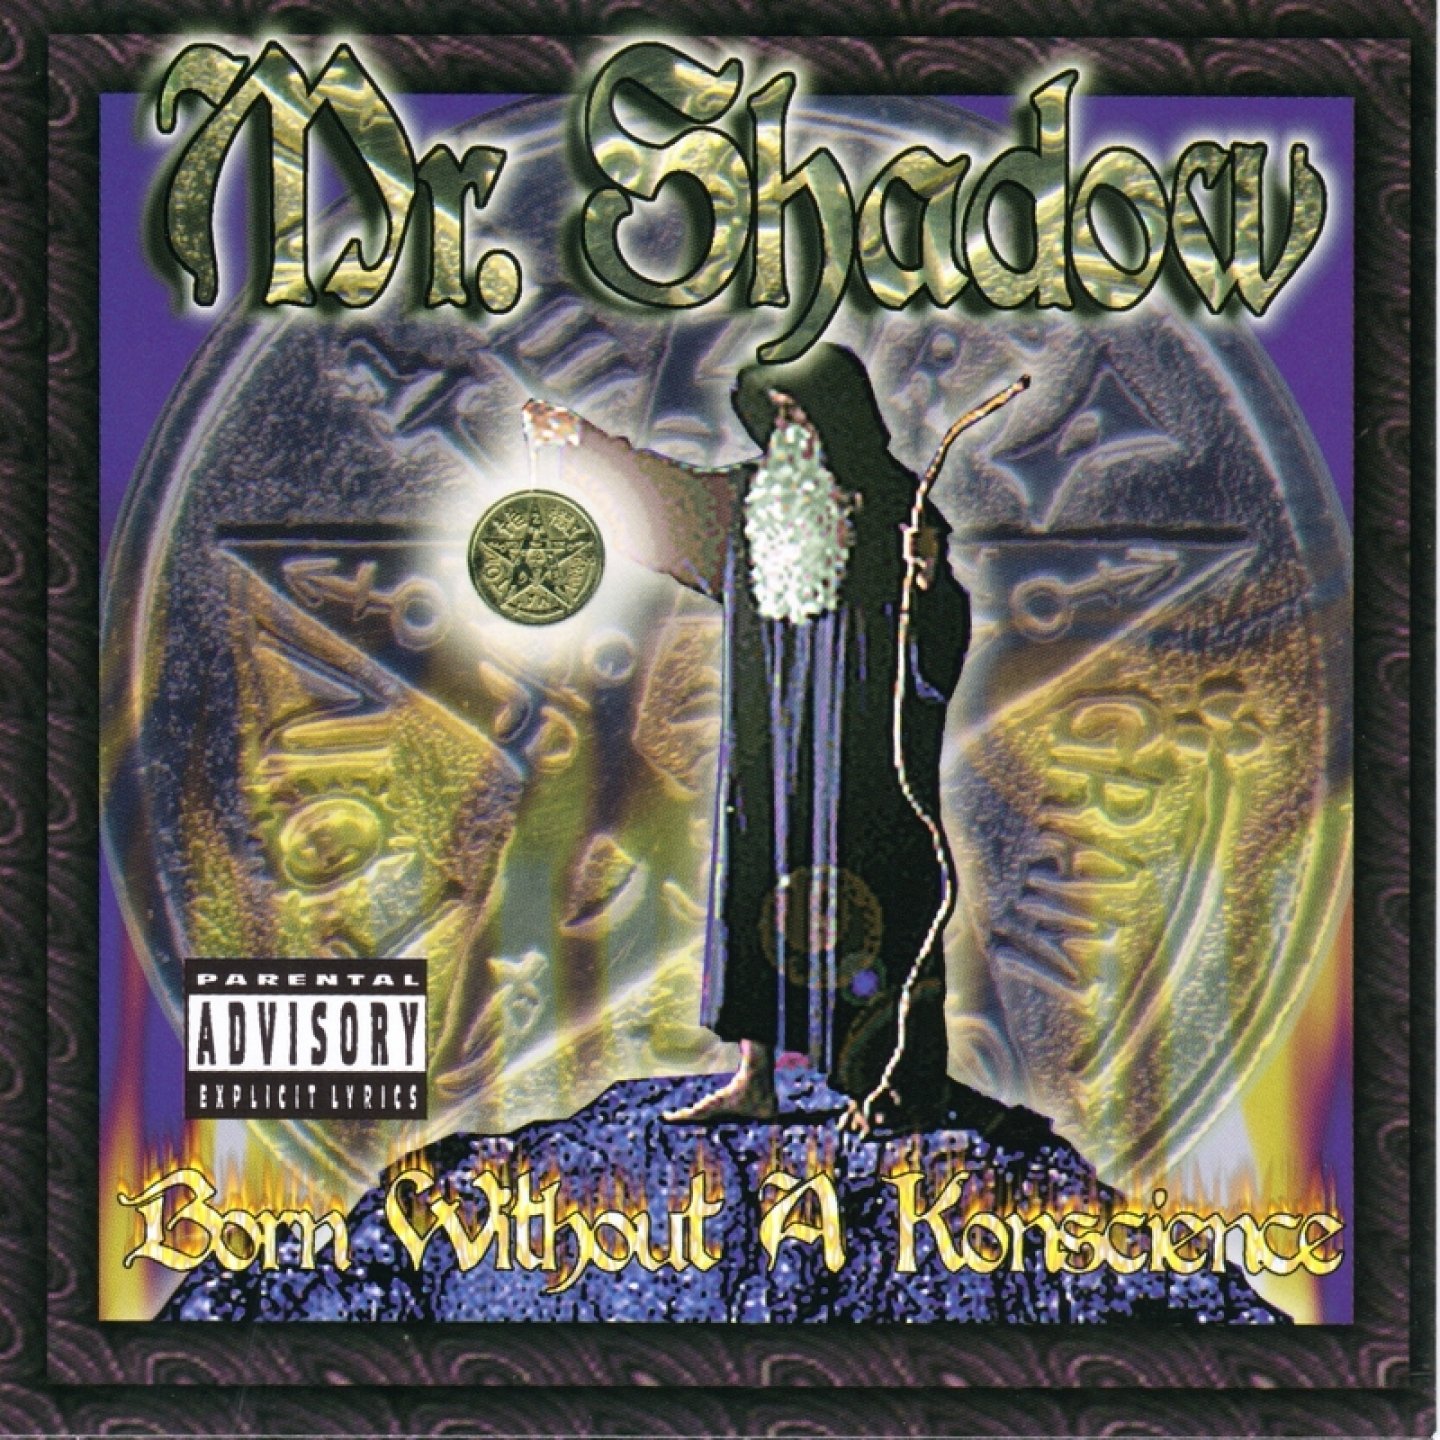 Mr. Shadow - Born Without A Konscience (1999) FLAC Download